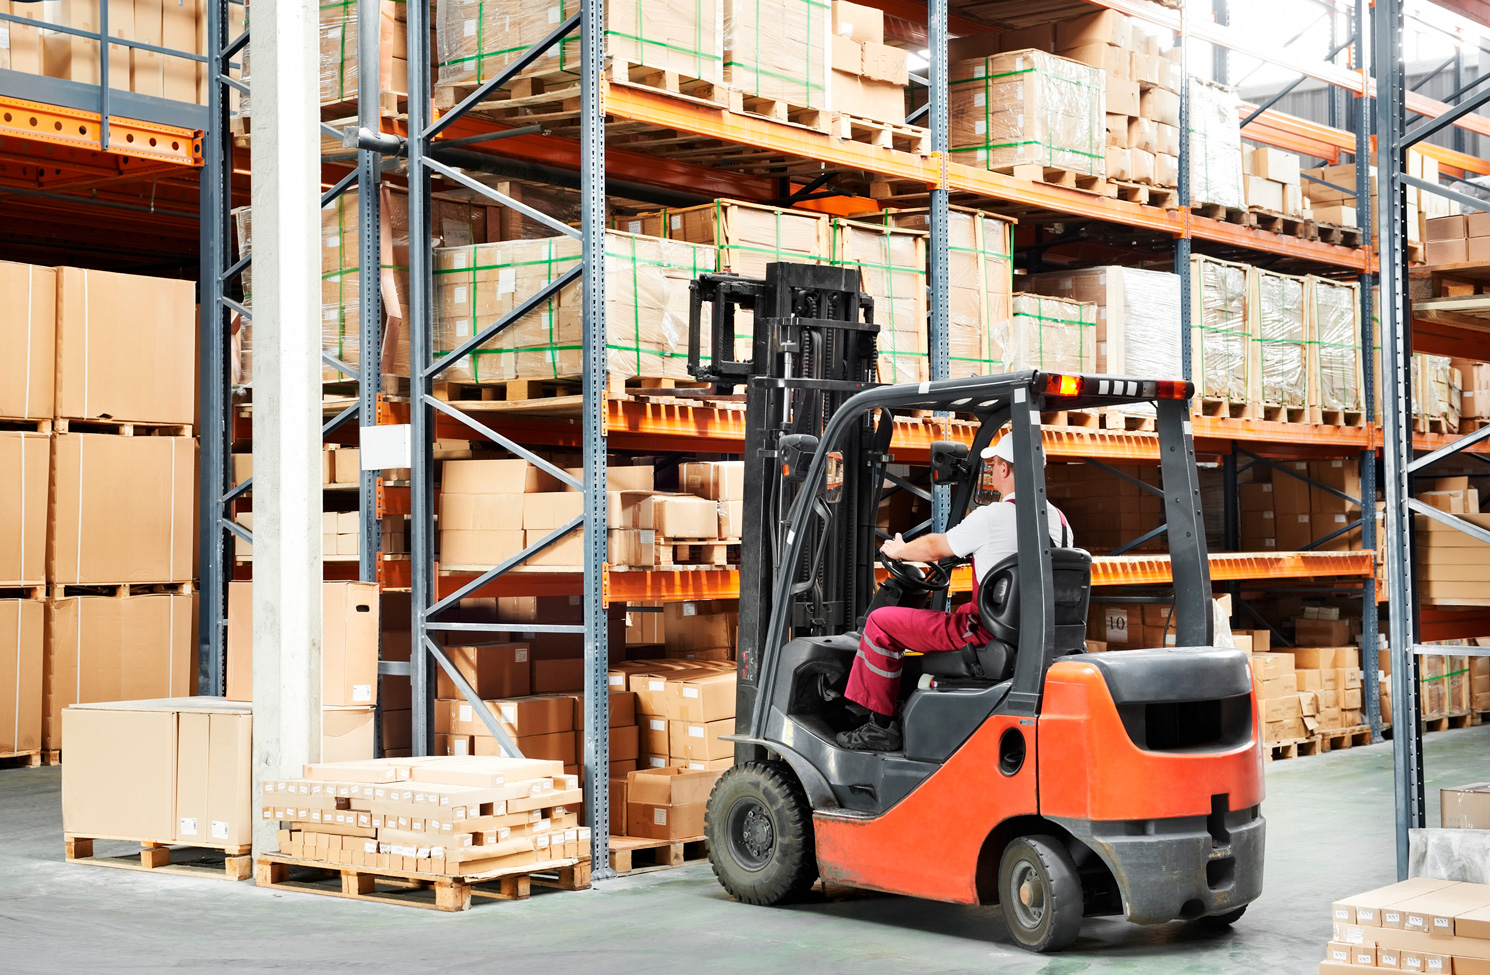 Forklift operator in action in a warehouse